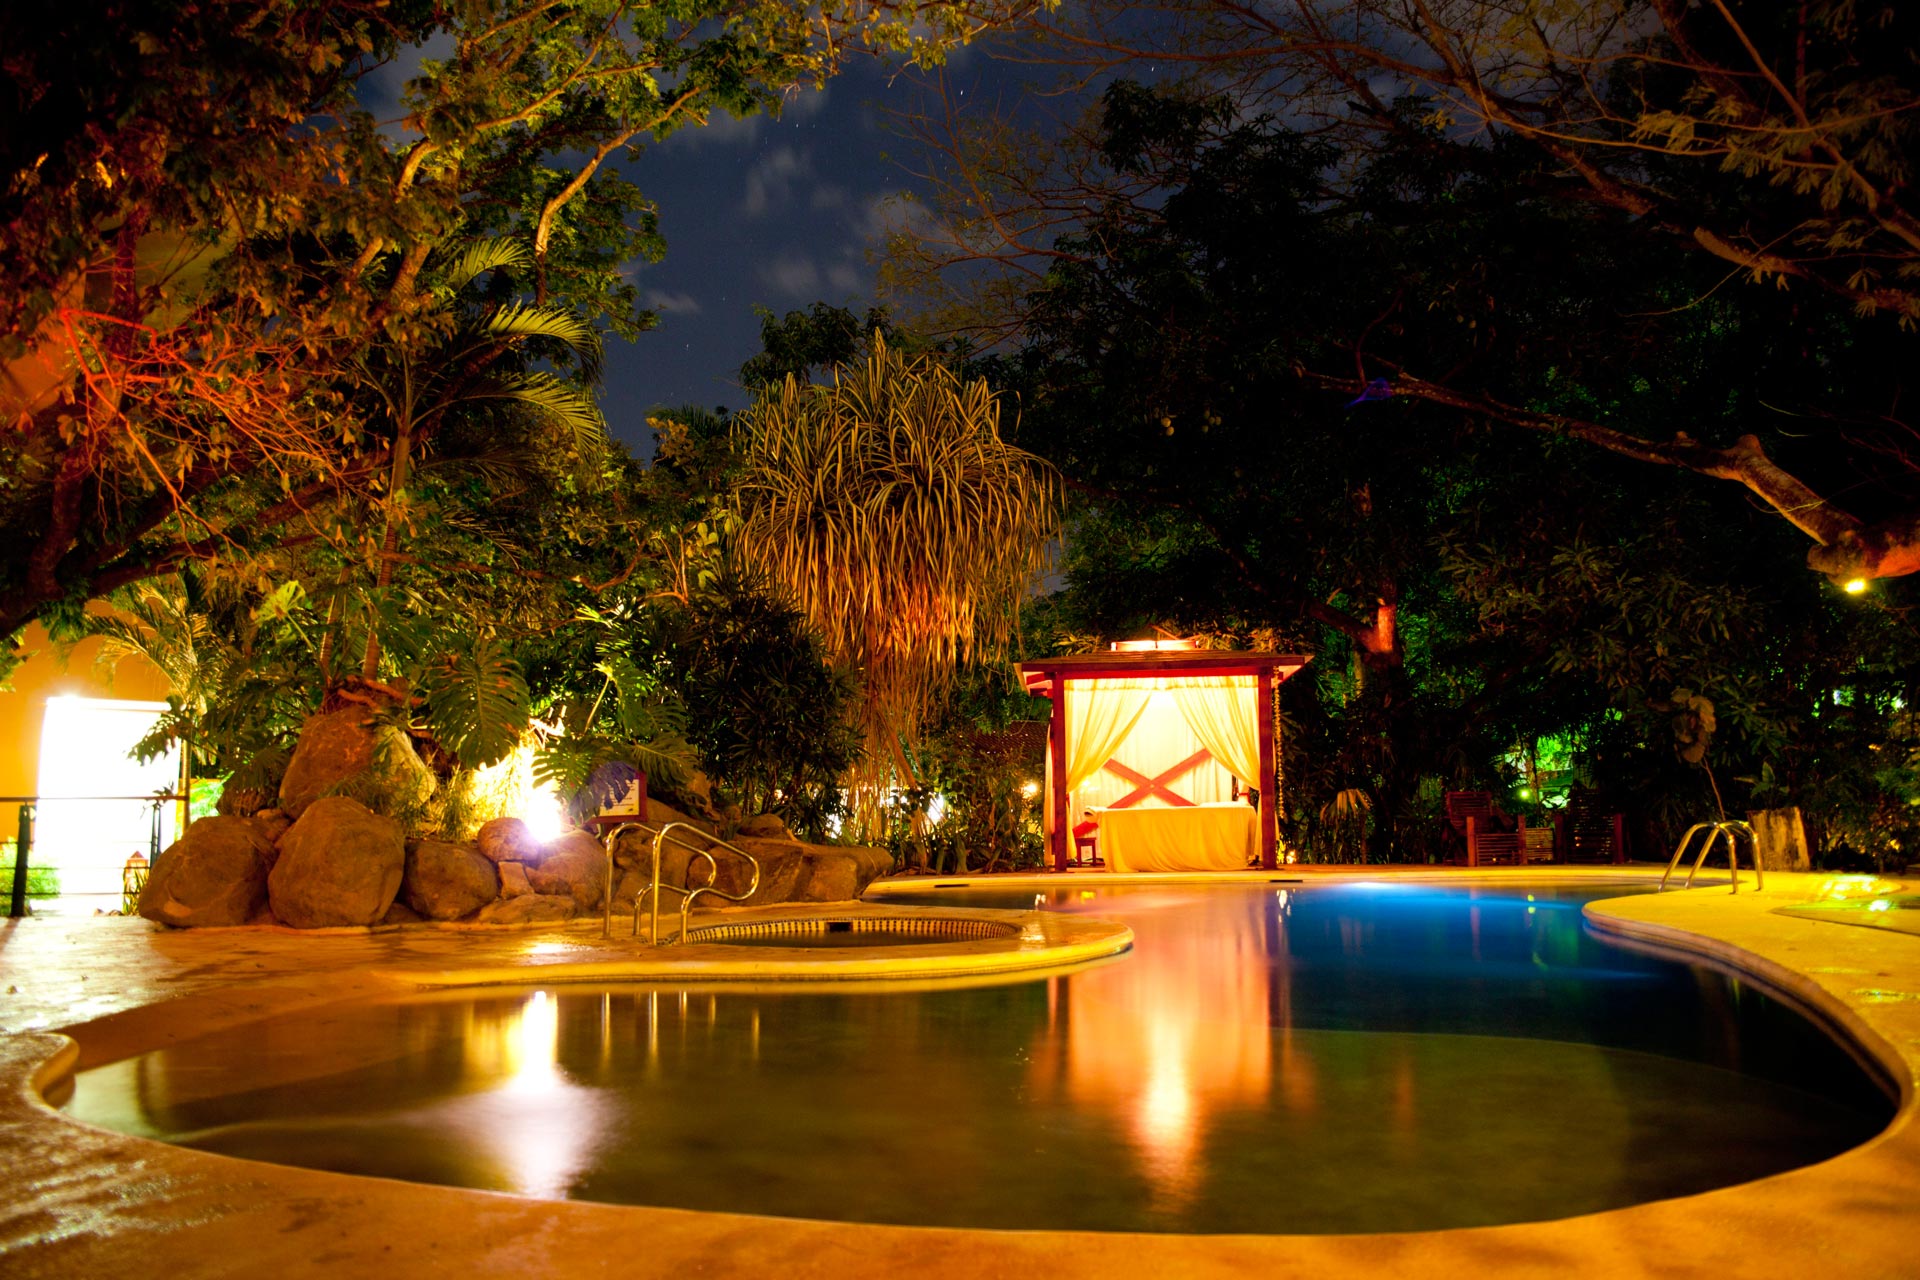 Costa-Rican-pet-friendly-hotels-and-tourism